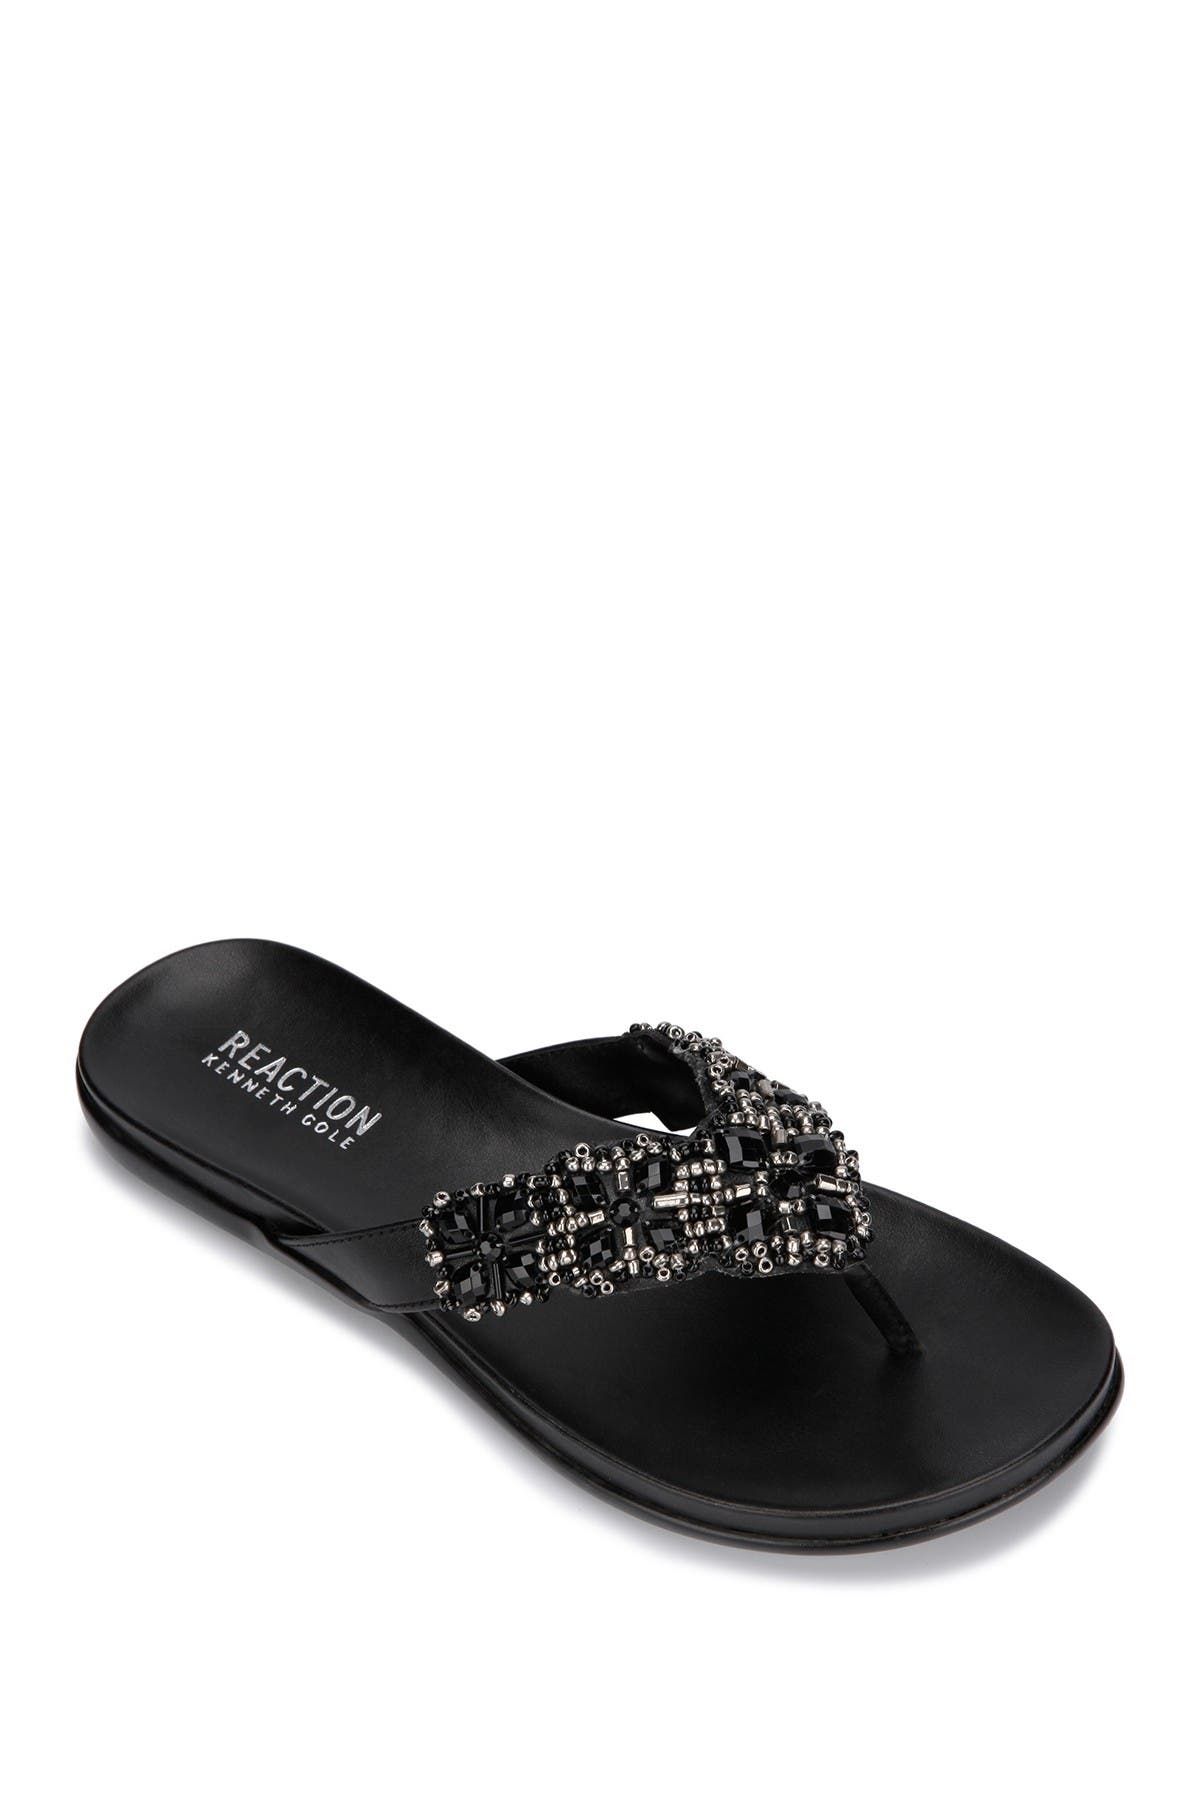 Women Clothing, Shoes & Jewelry Flip-Flops Kenneth Cole REACTION Womens ...